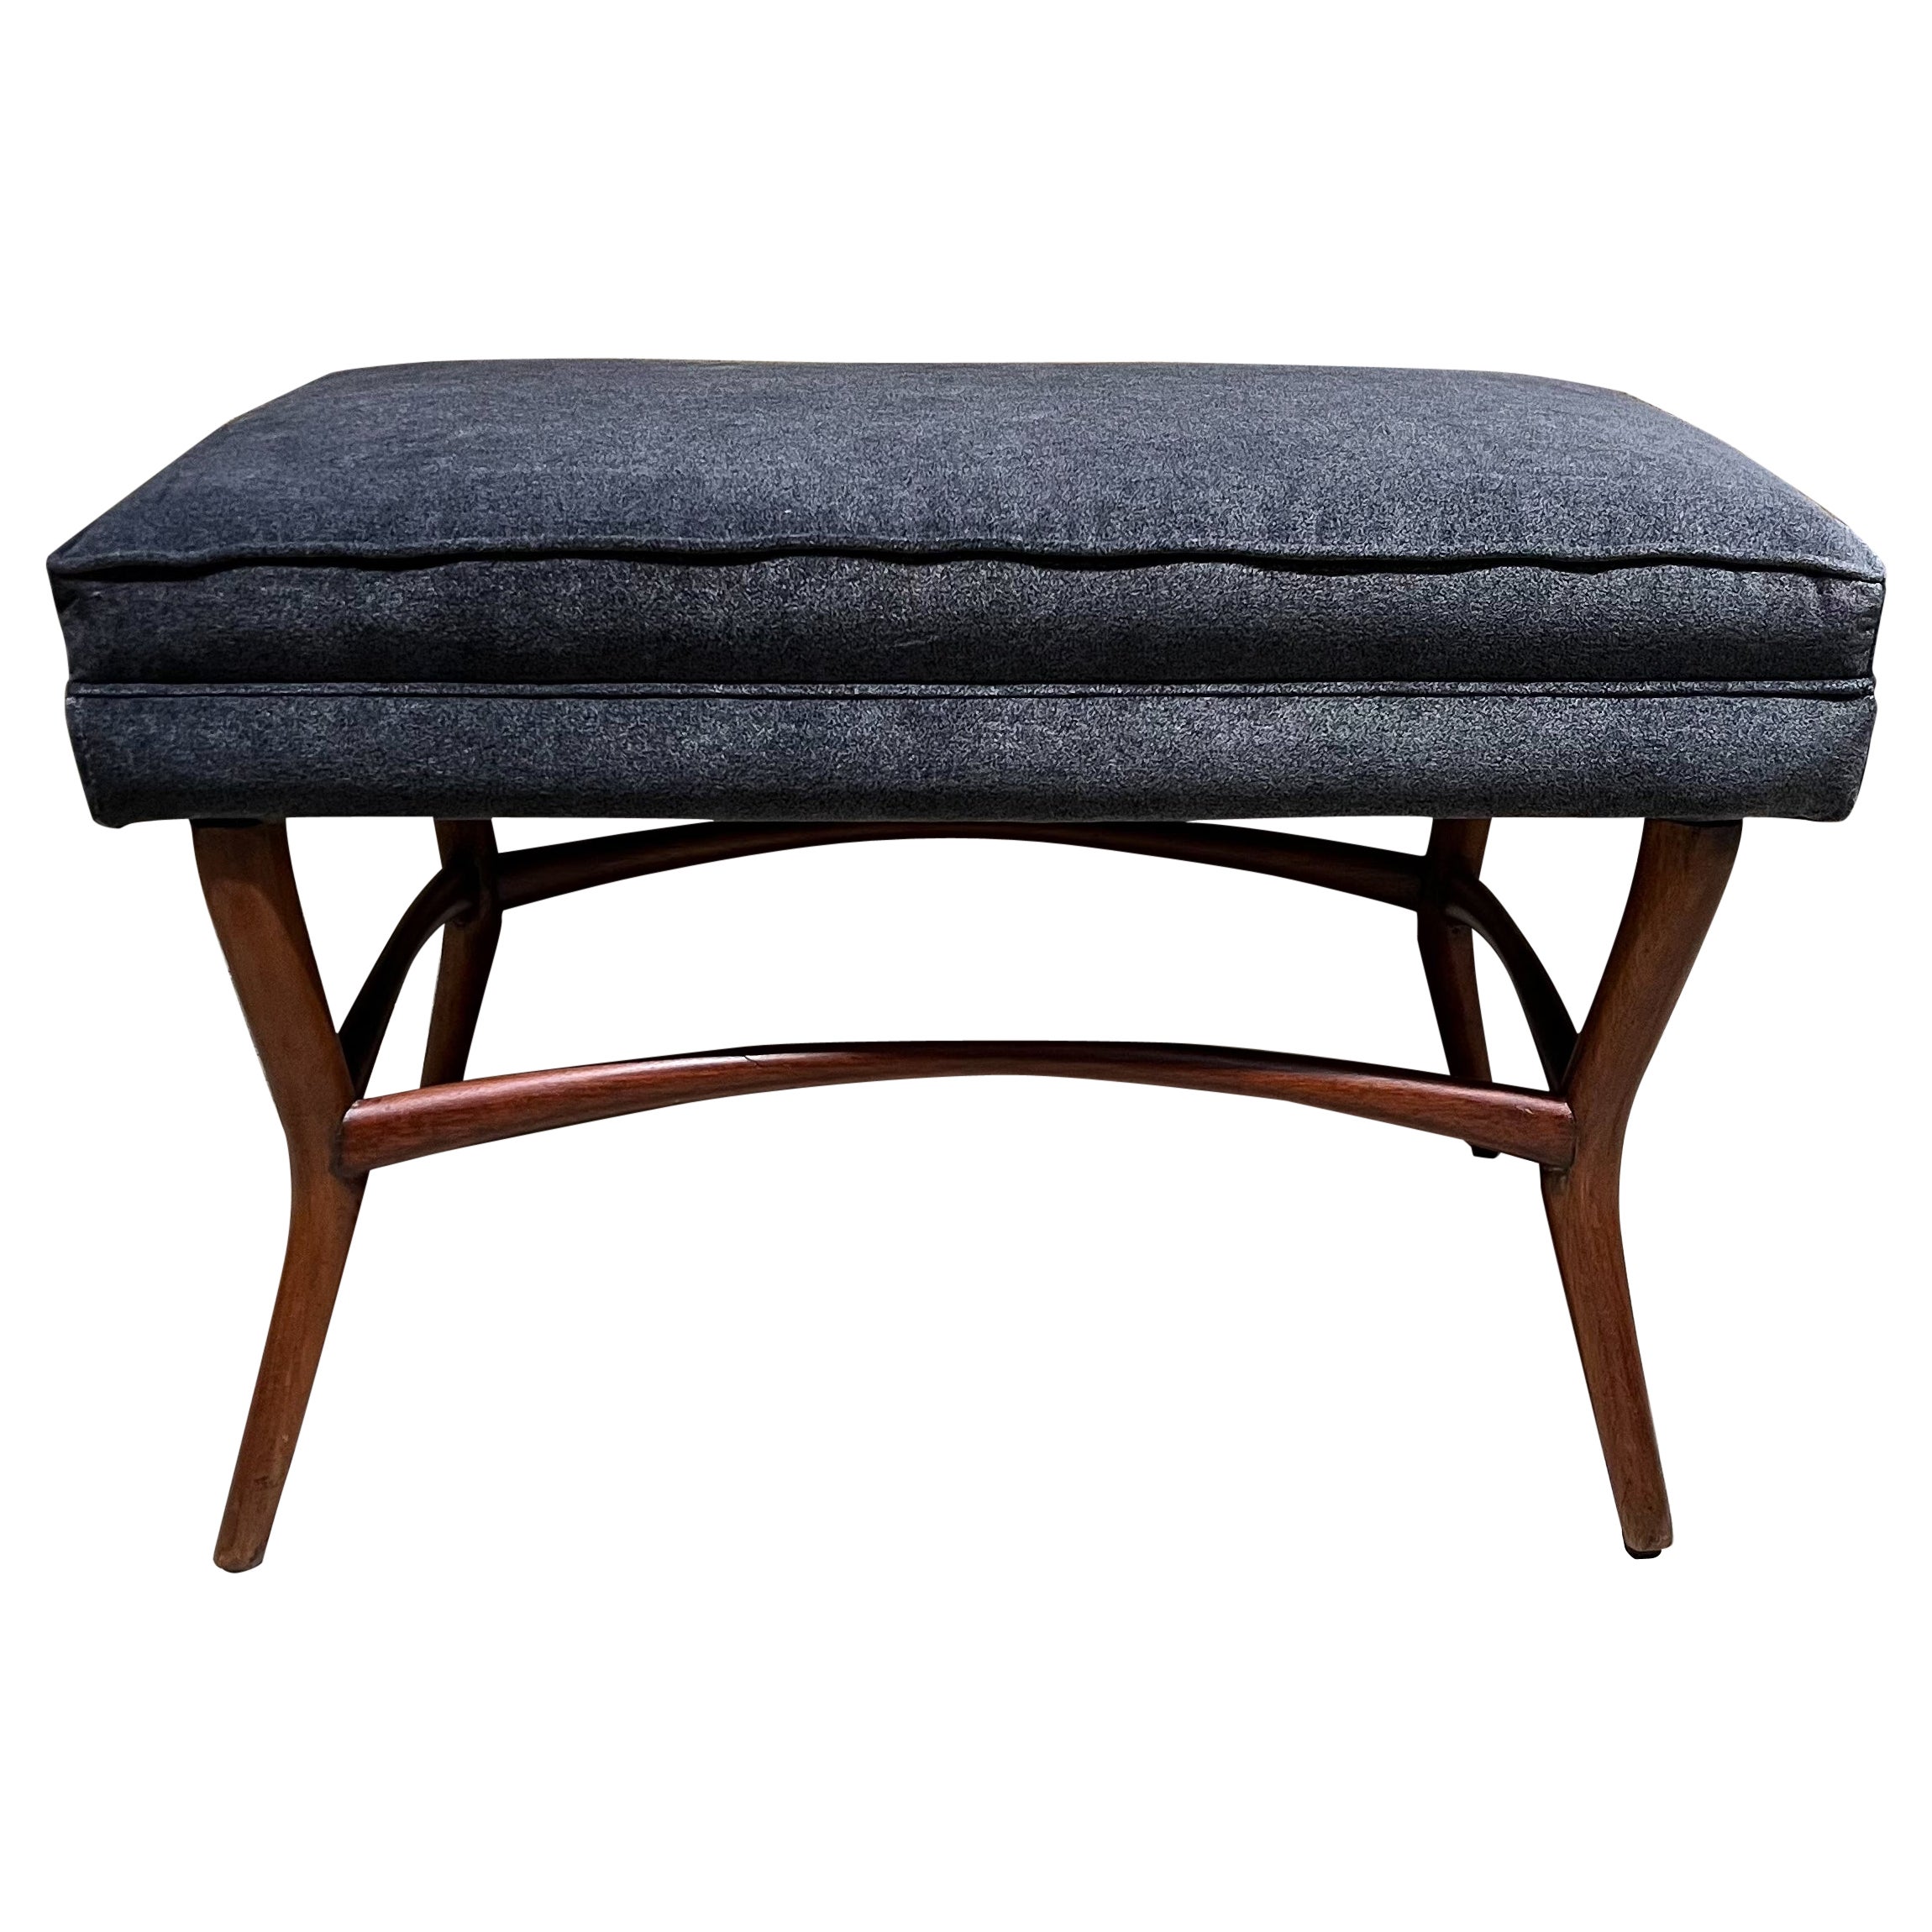 1950s Modernist Bench in Mahogany New Cushioned Gray Seat from Mexico